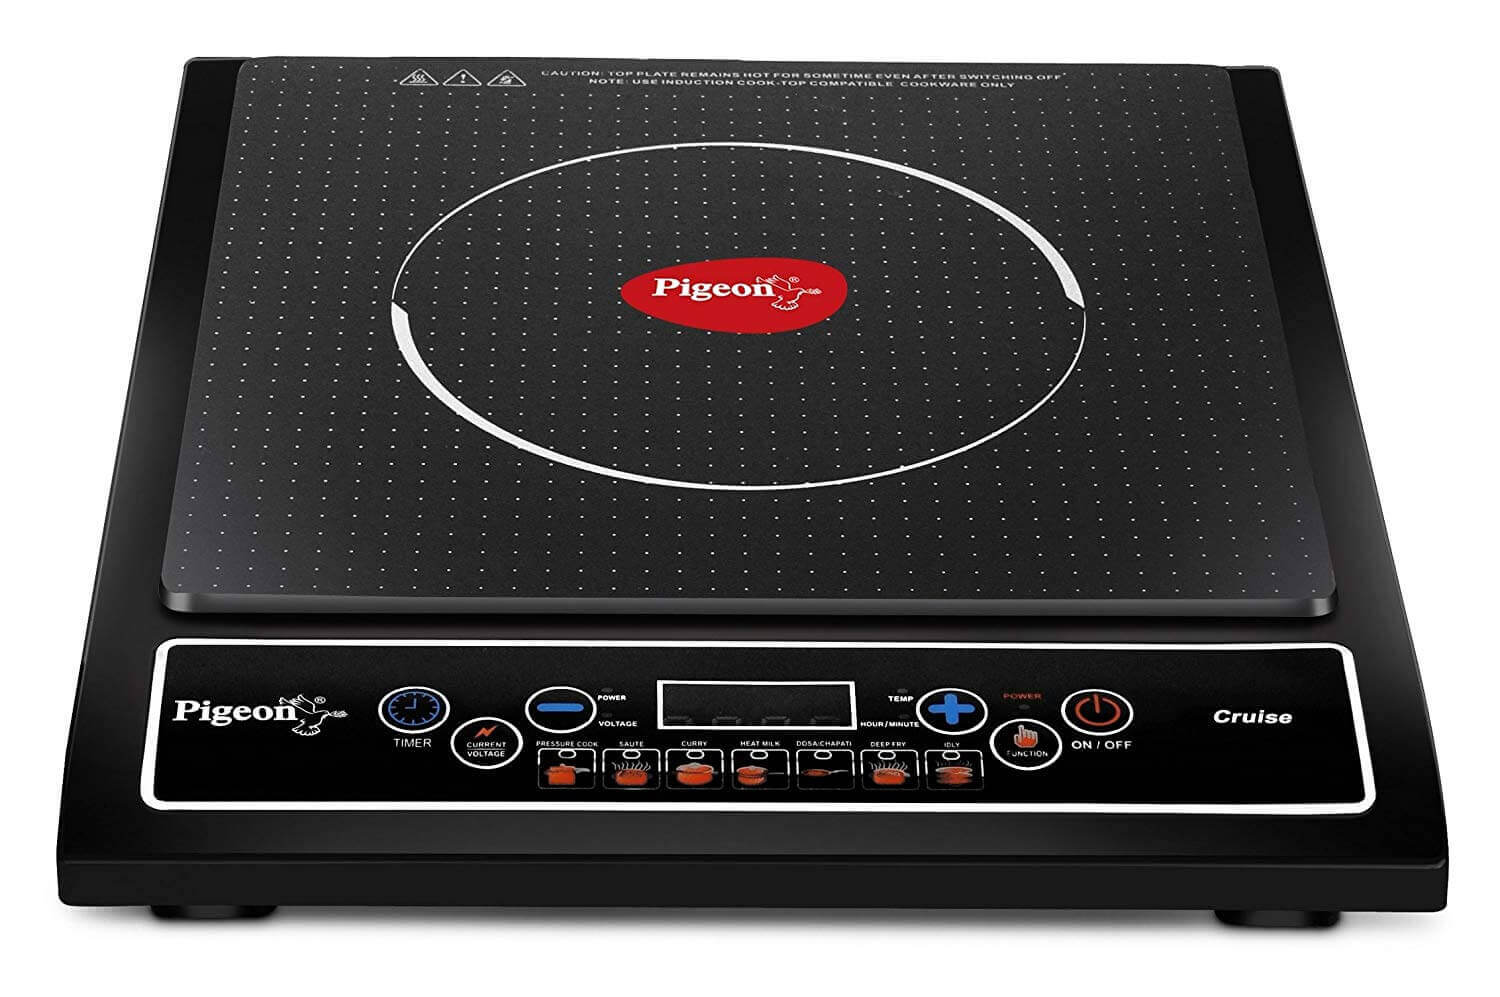 7 Best Induction Cooktop Company in India[Buyers Guide